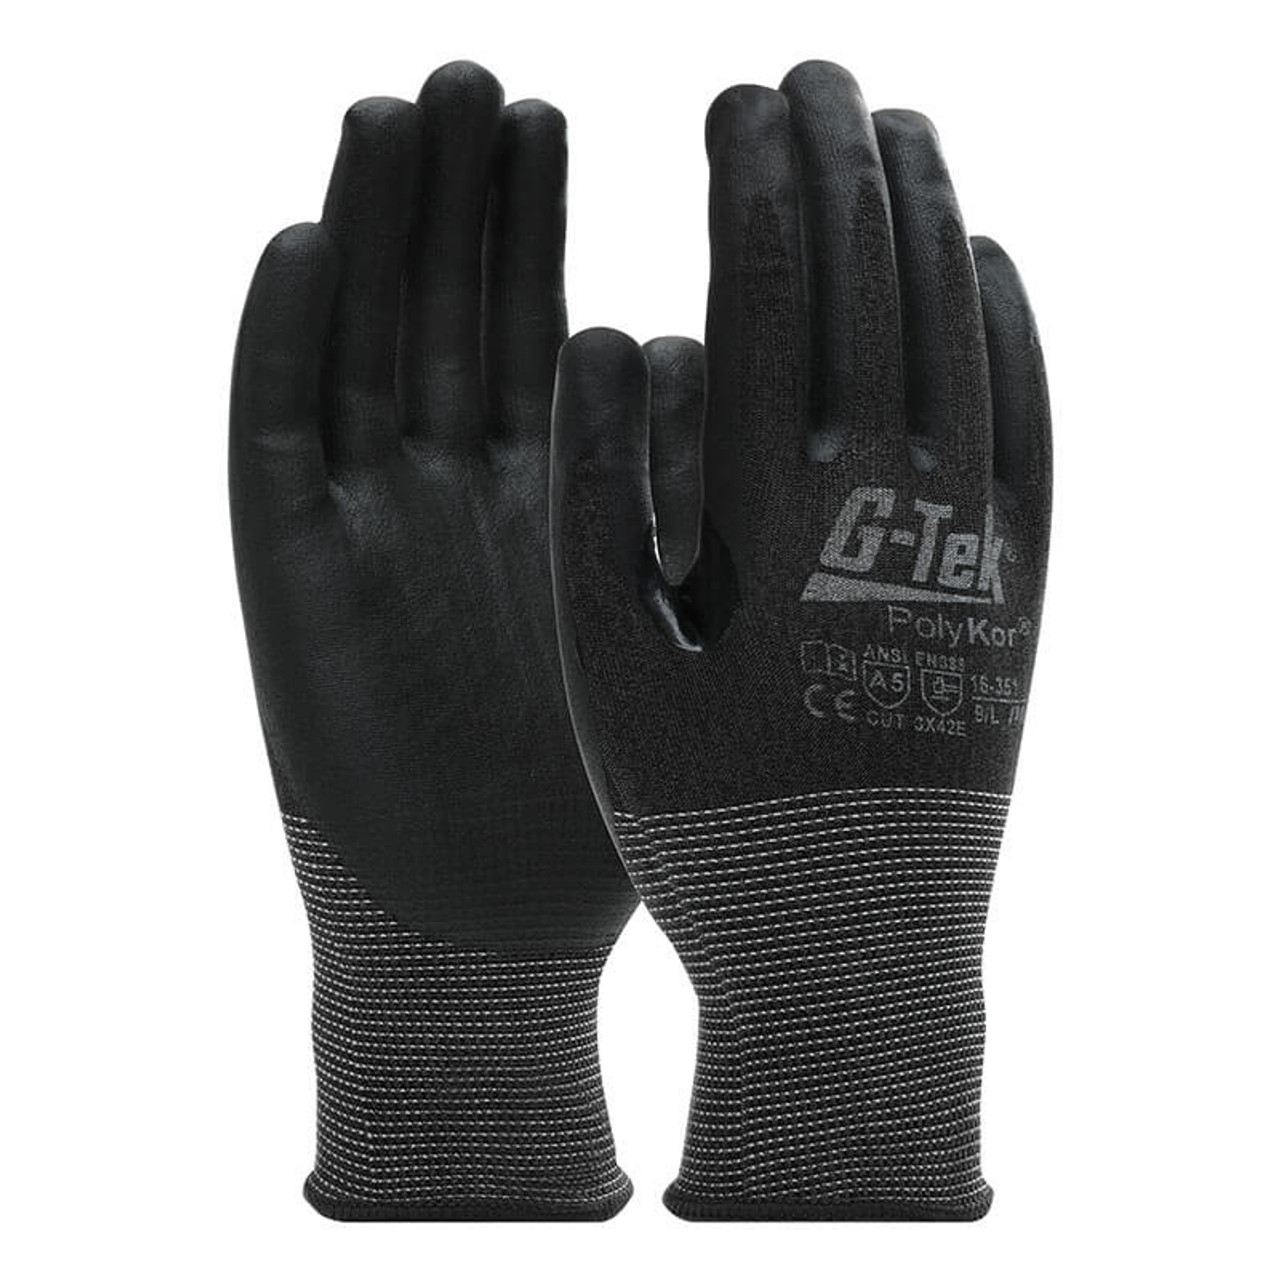 Cut Resistant Gloves with ANSI A5 Food Grade & Touch Screen